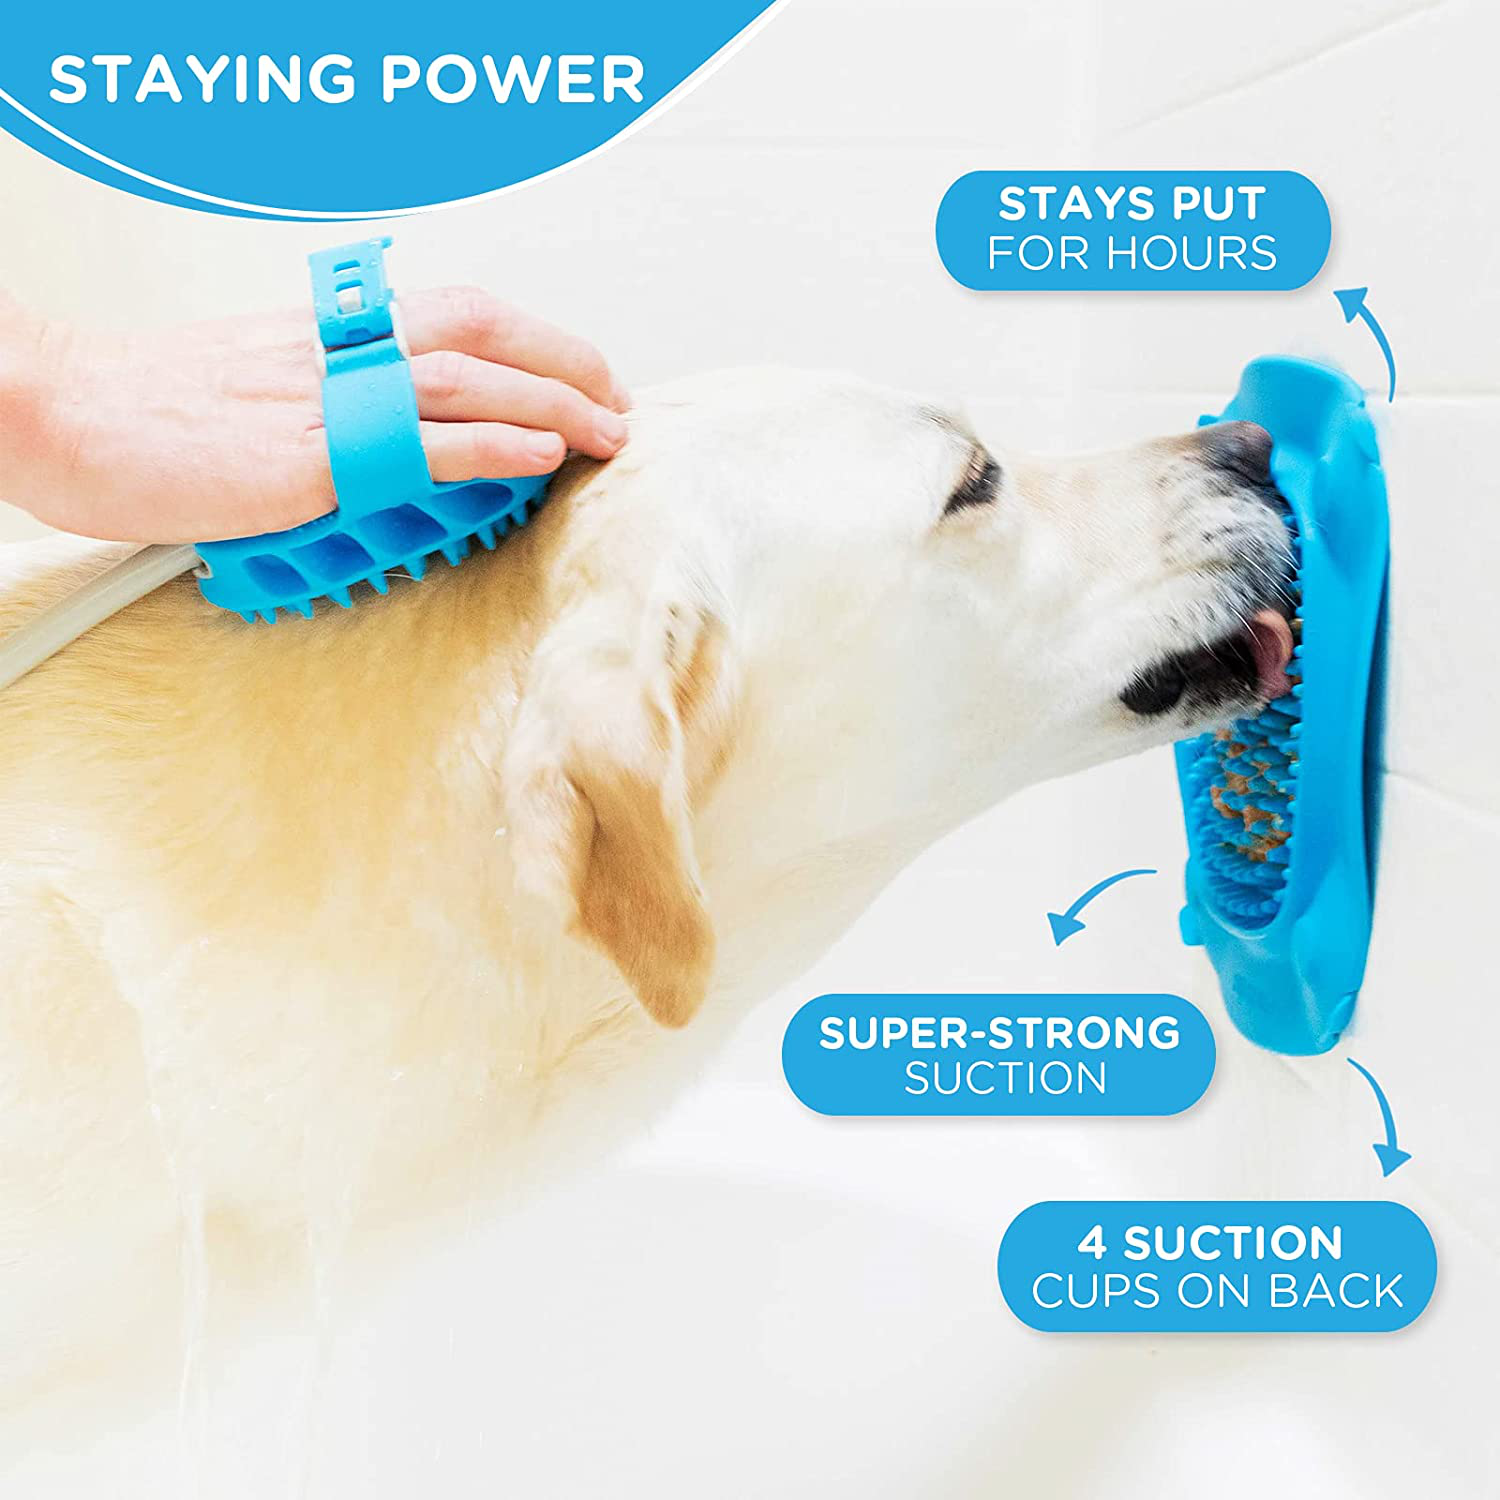 How to entertain a dog, sniffing rugs and licking pads -  Electric-Collars.com